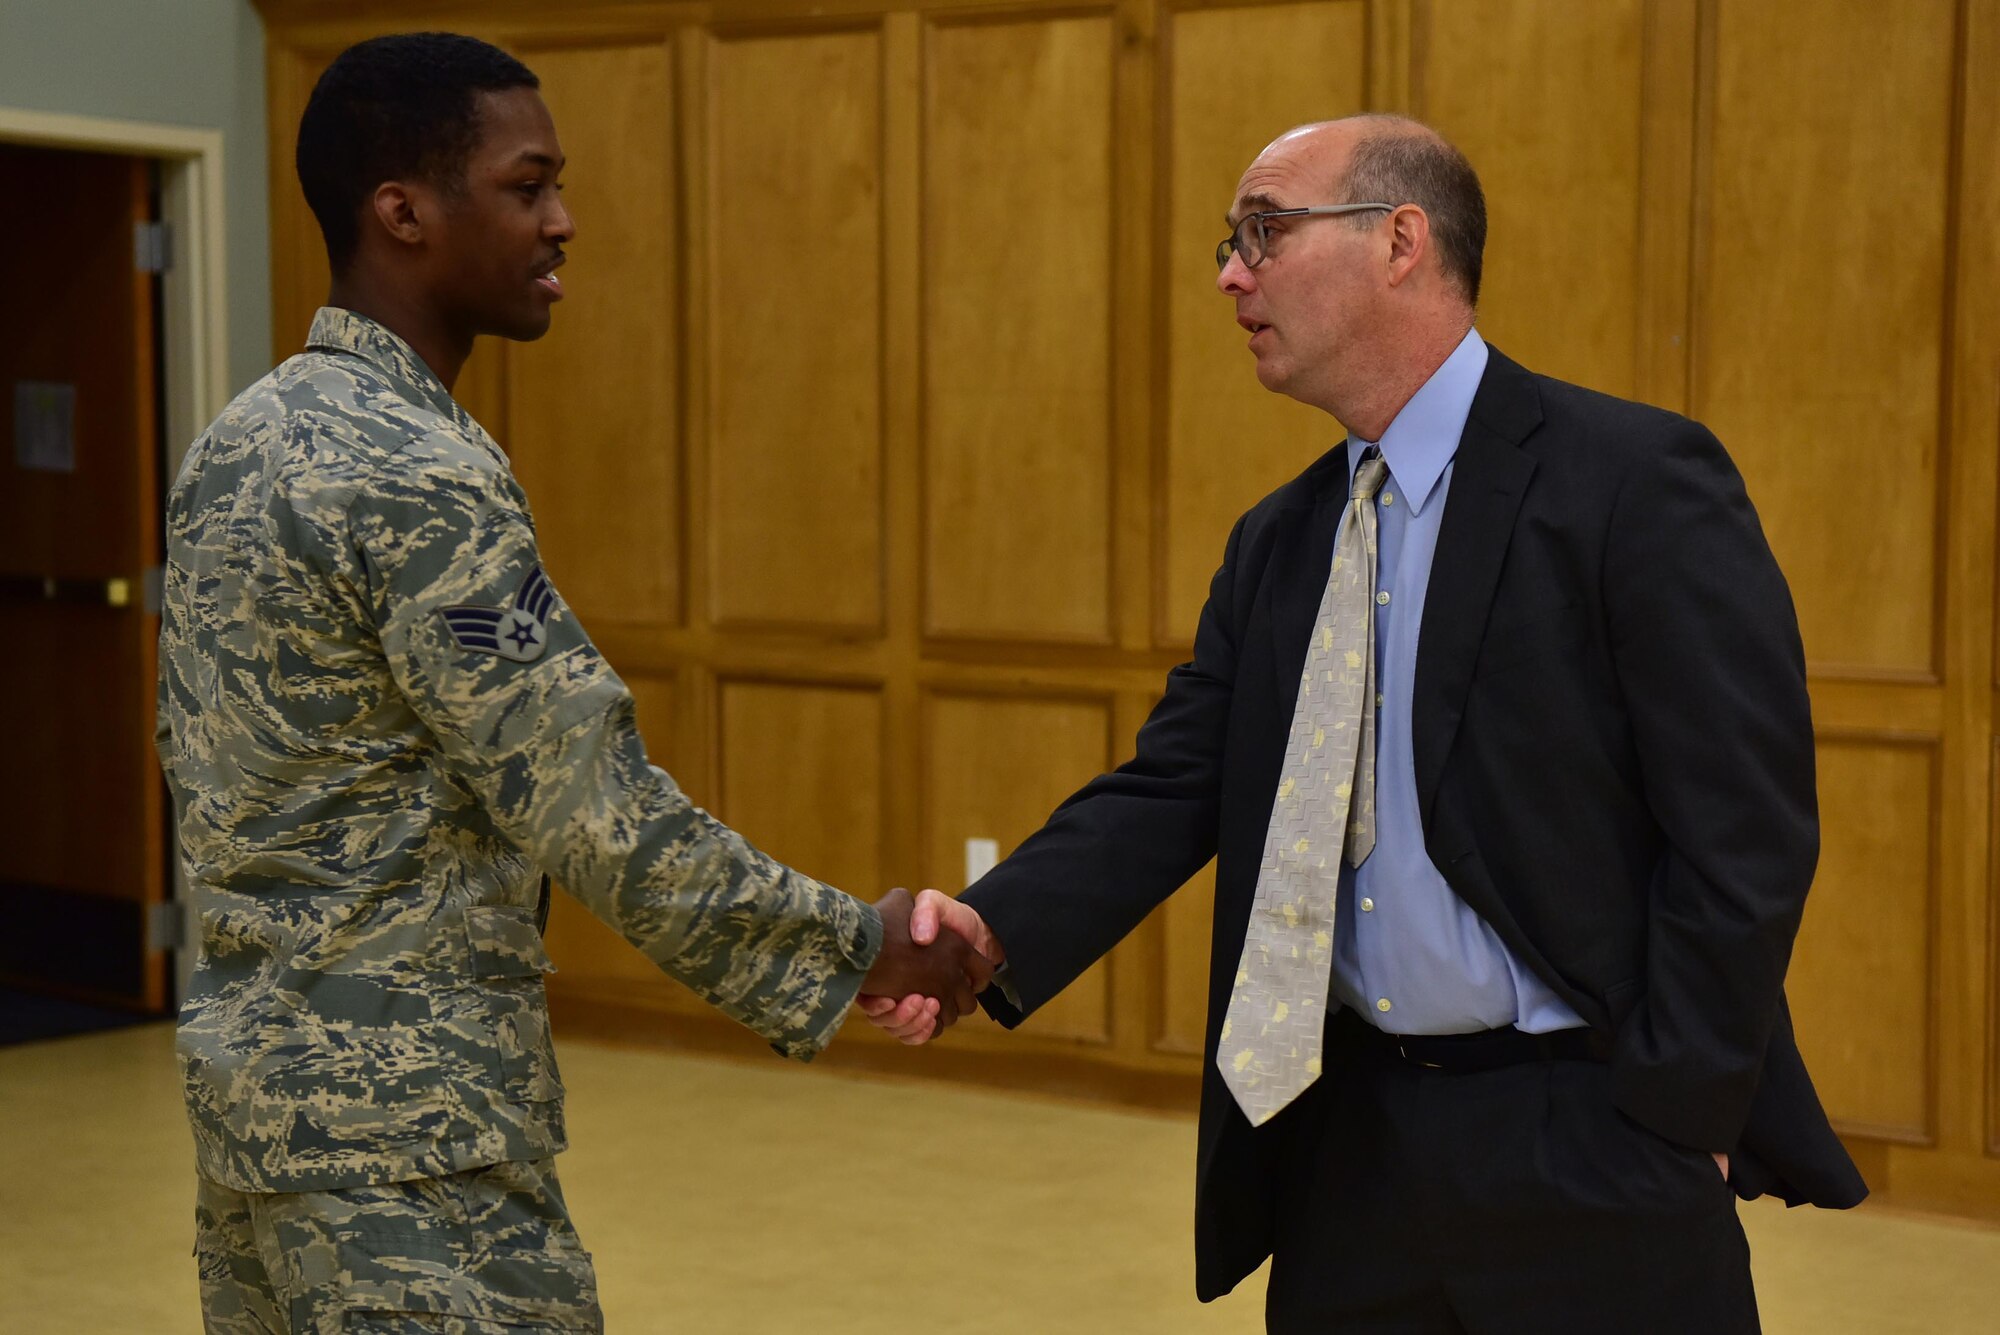 An Airman shakes the hand of the guest speaker during a Holocaust rembrance service.